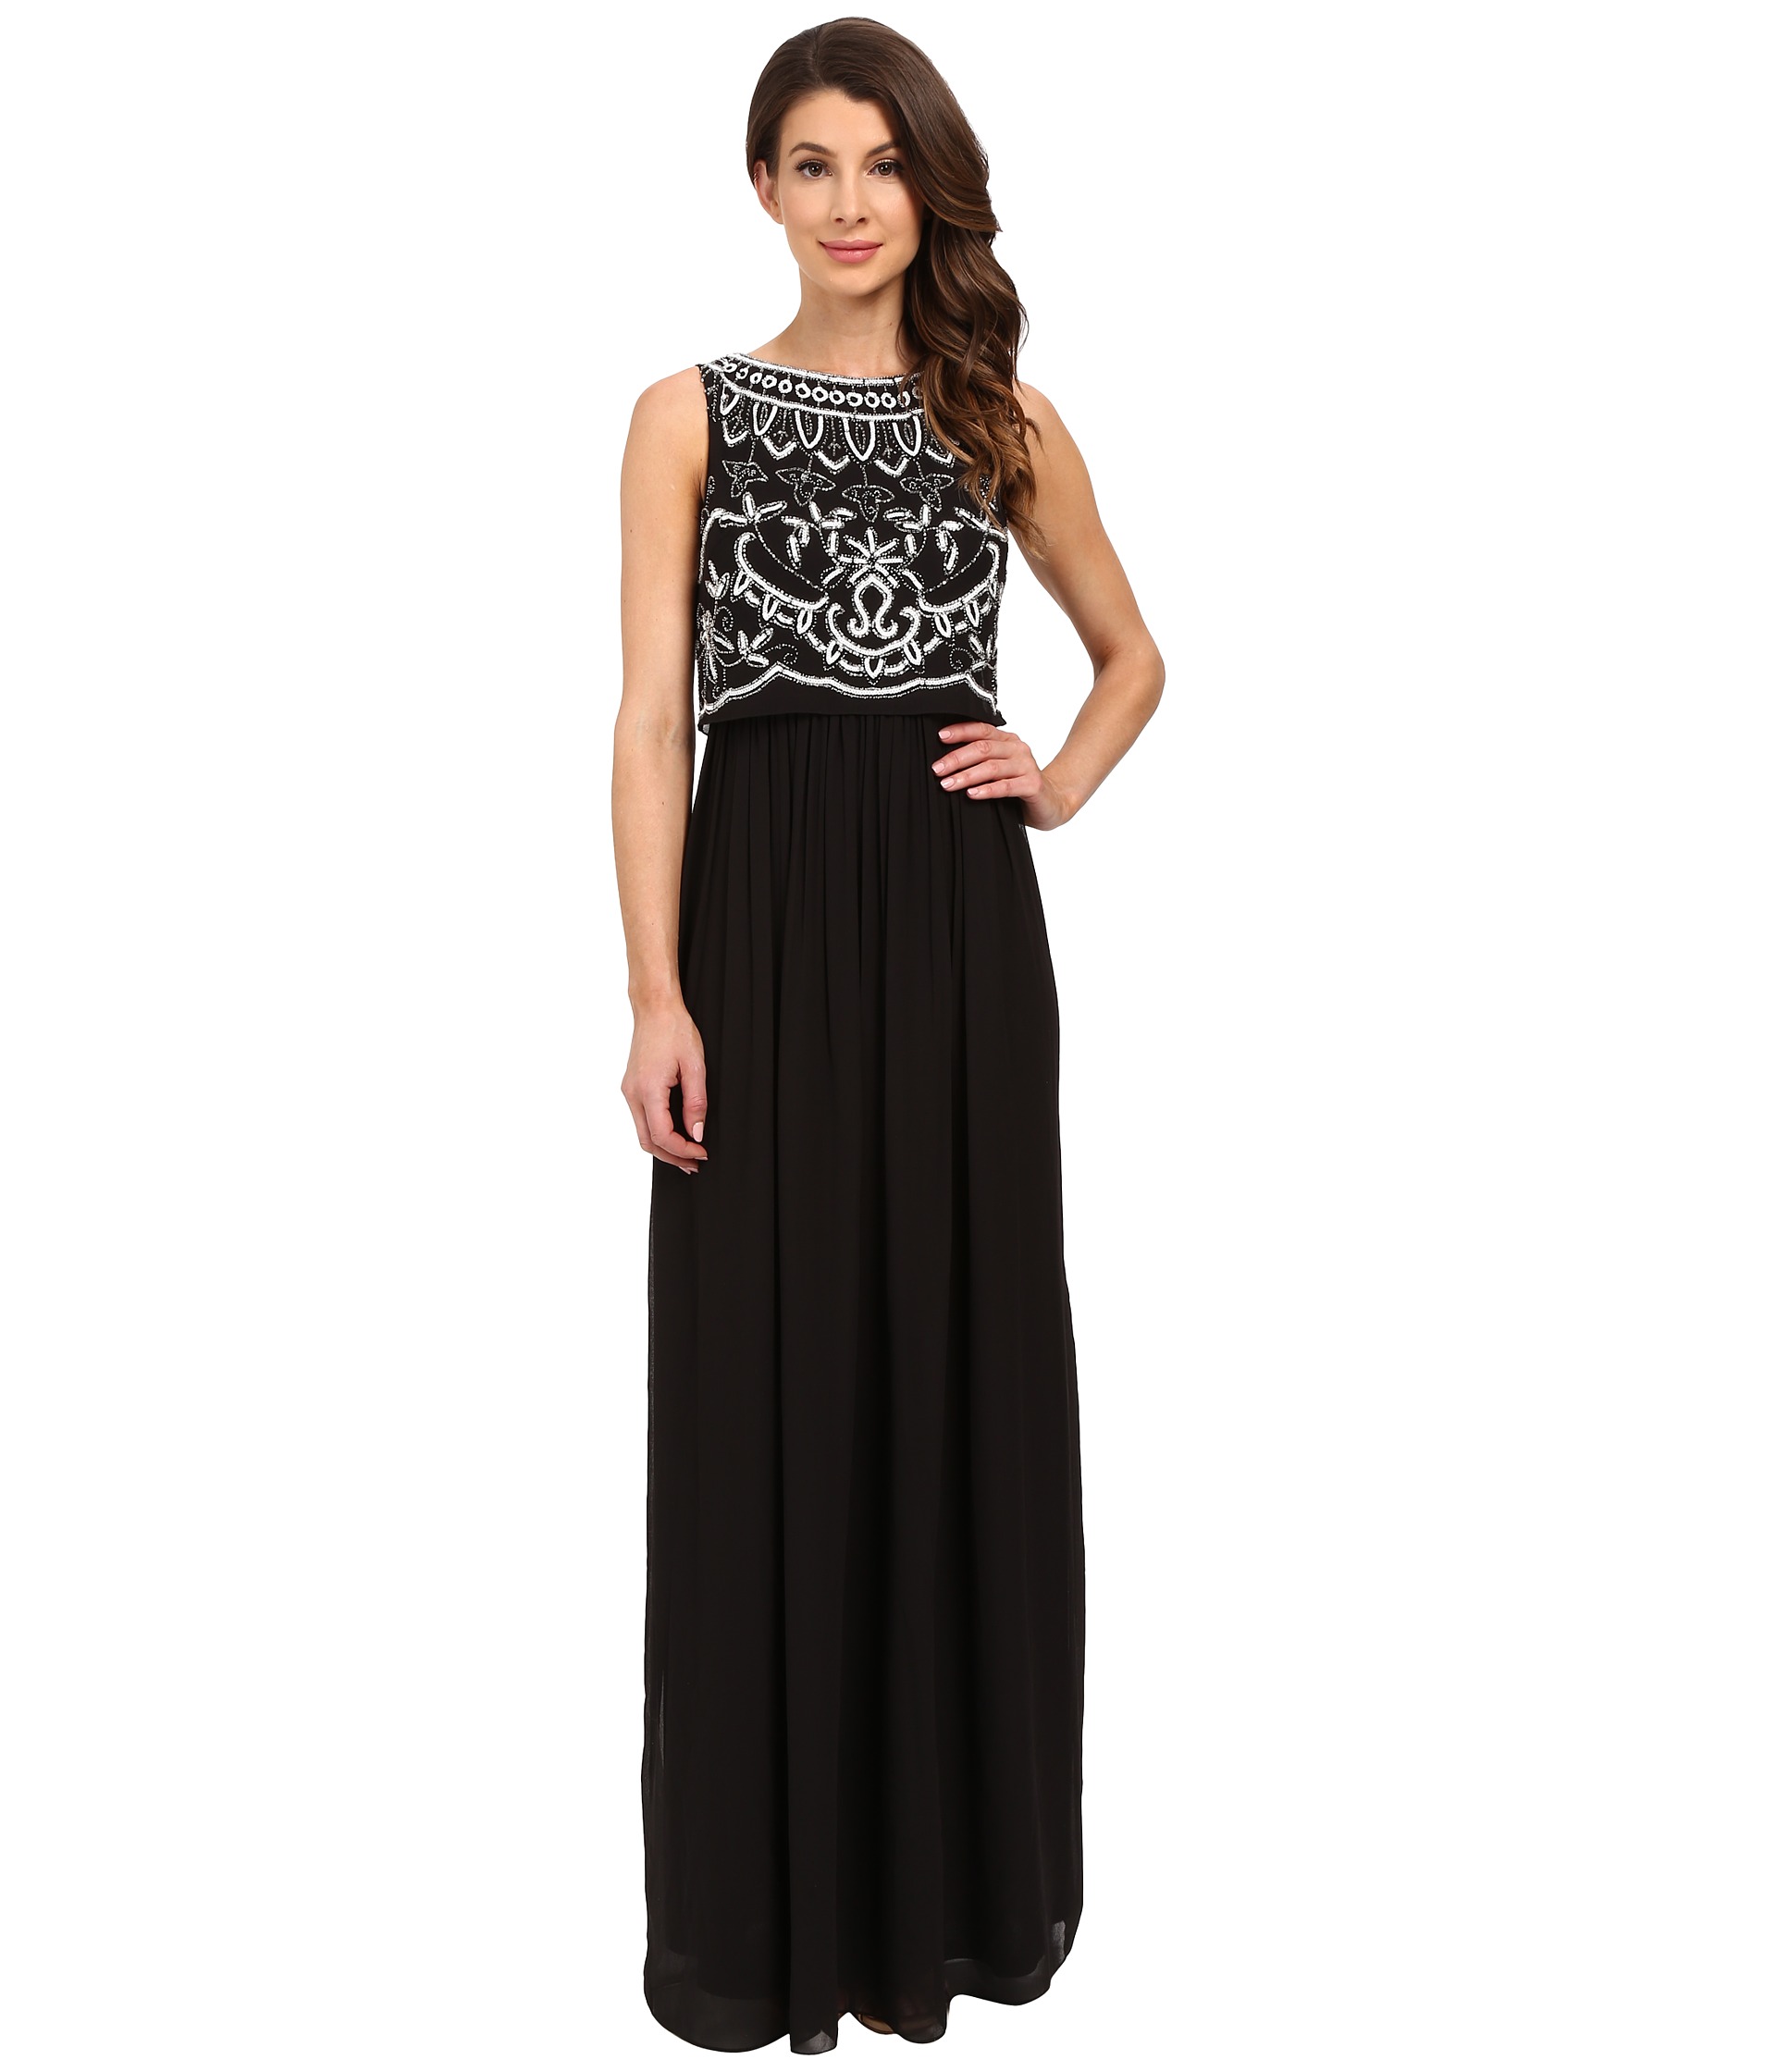 Adrianna Papell Beaded Bodice Gown